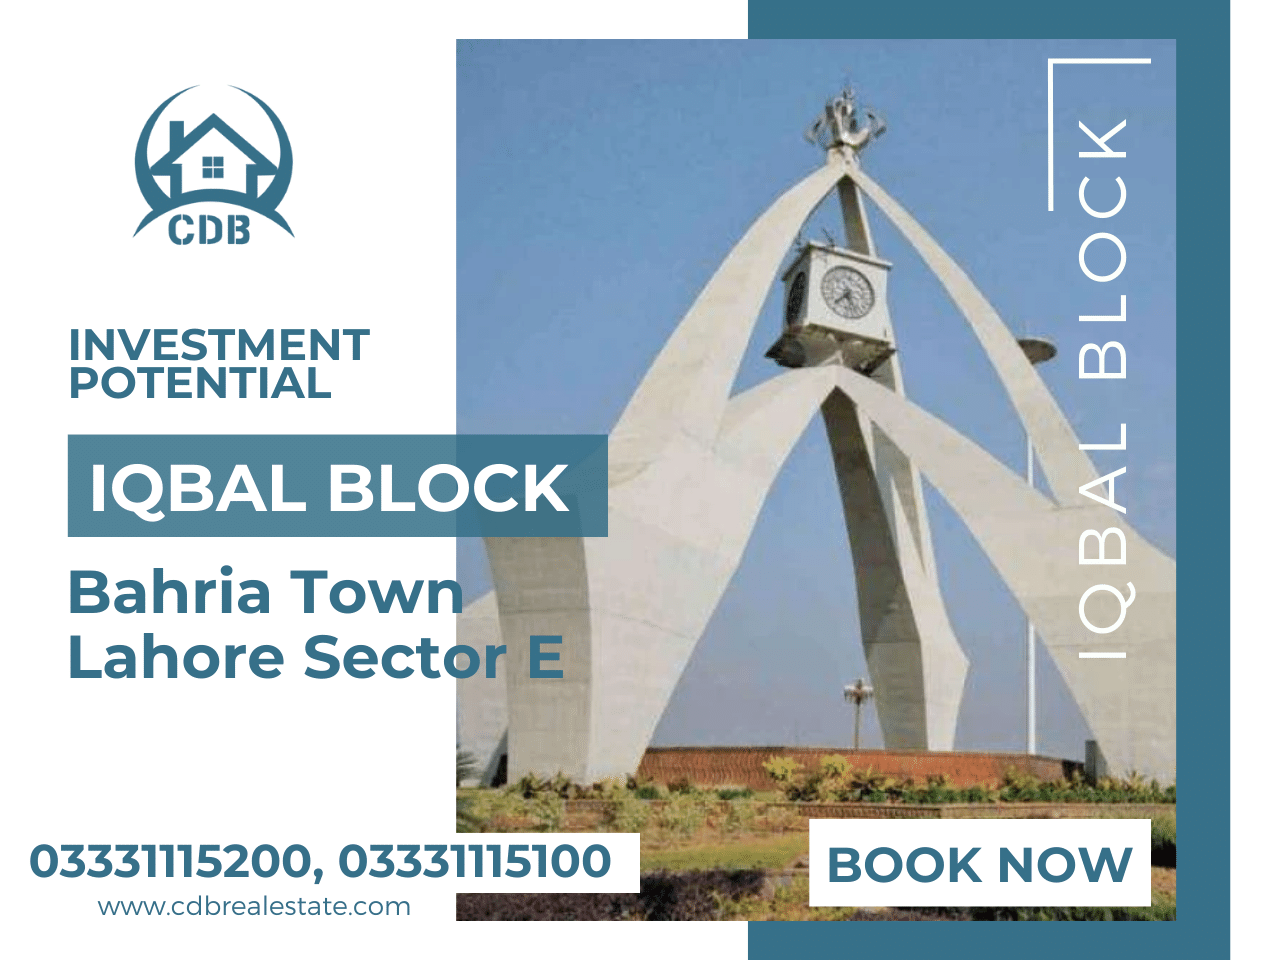 Iqbal Block in Bahria Town Lahore Sector E